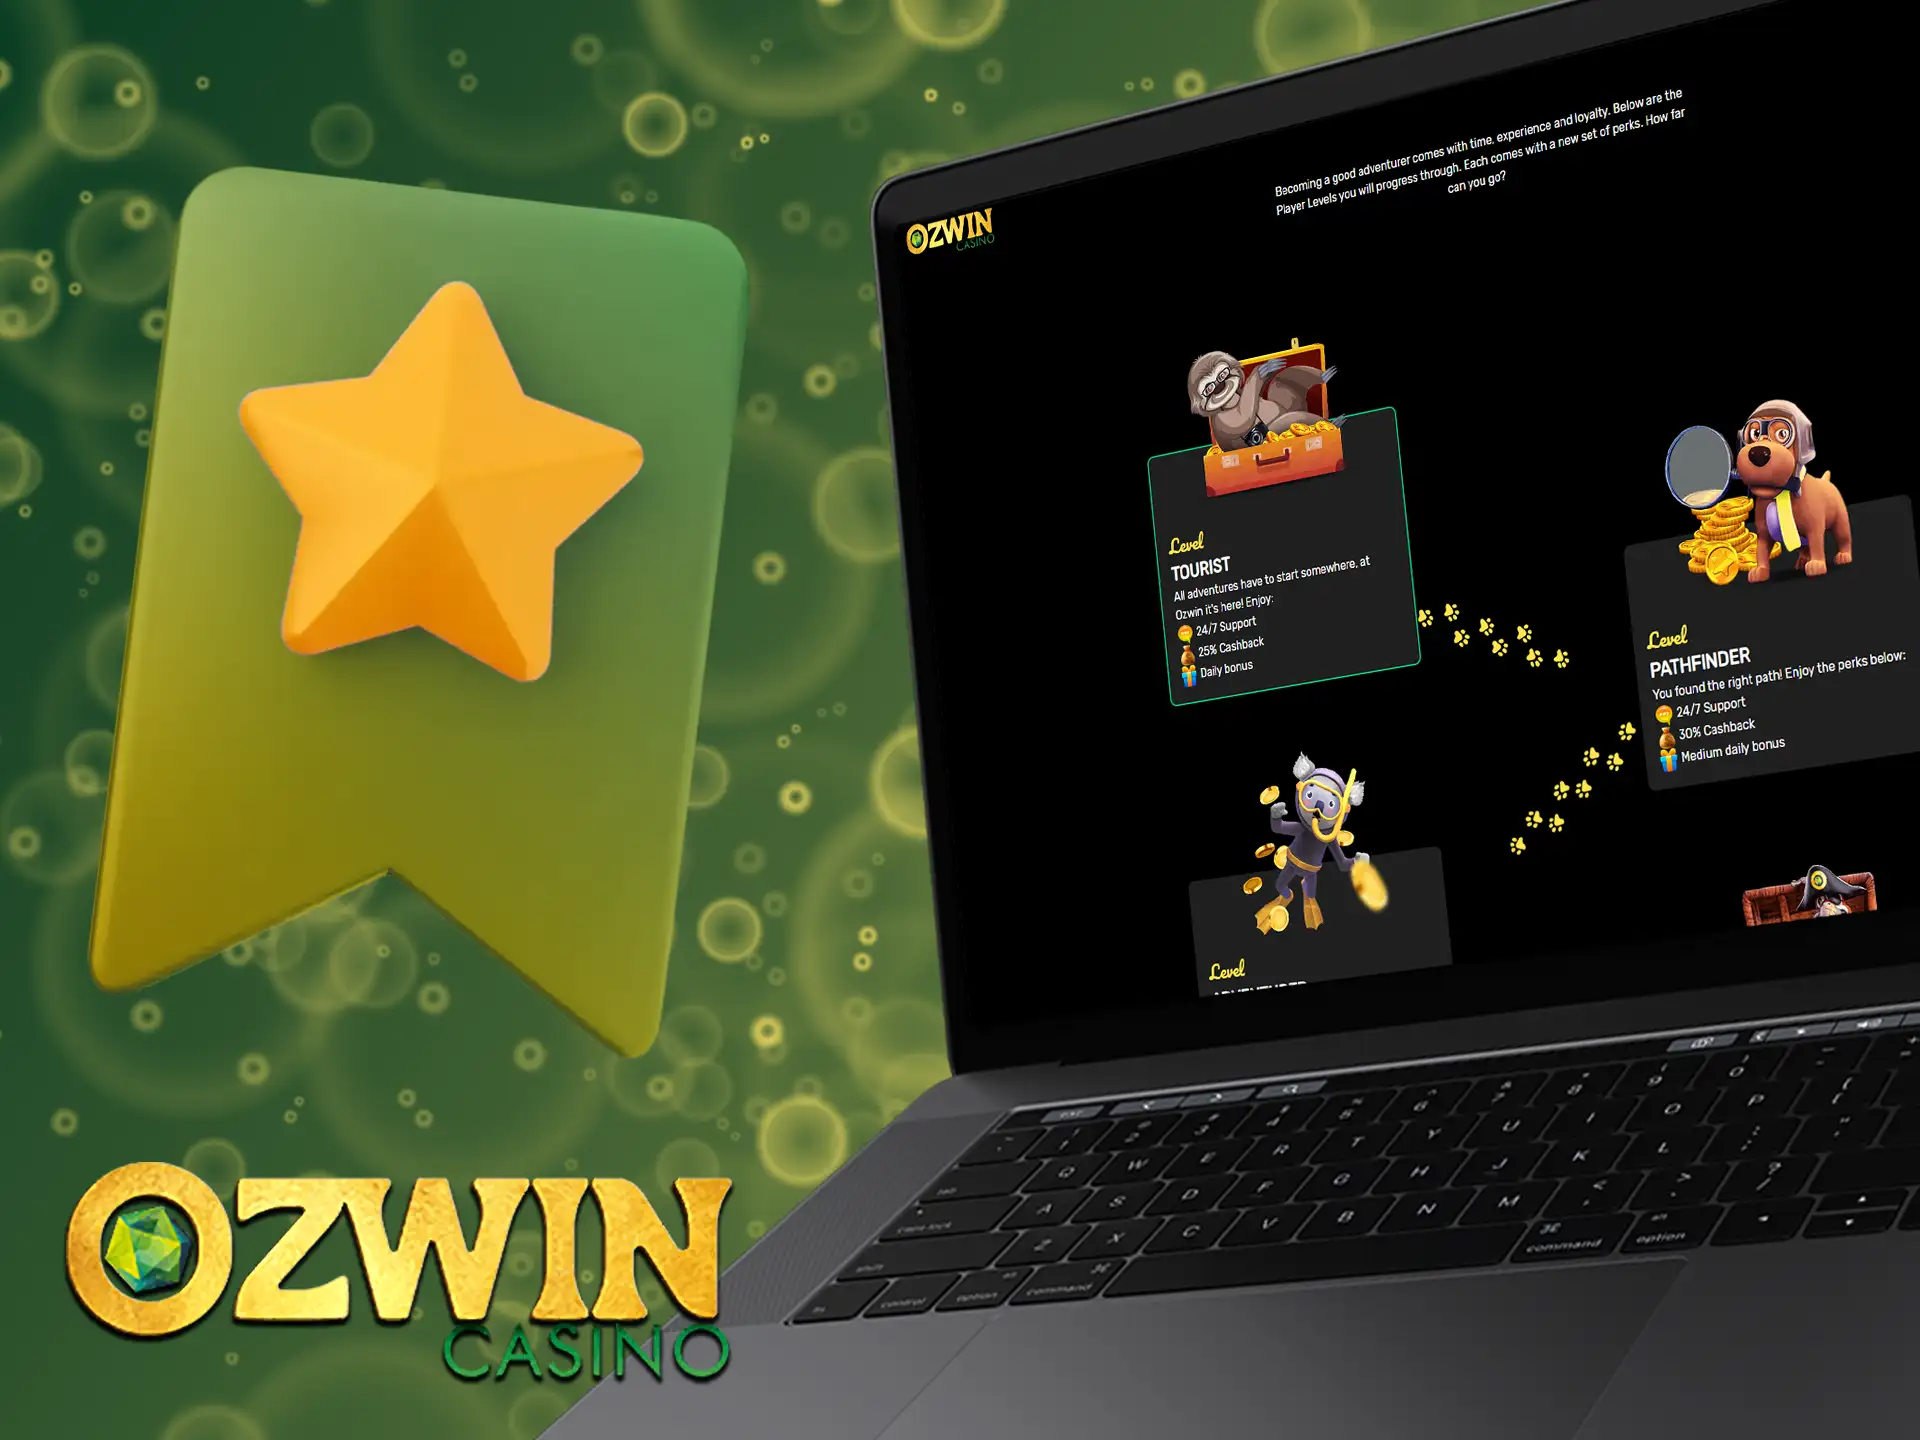 Ozwin rewards loyal customers with a program that unlocks extra benefits the longer you stay.